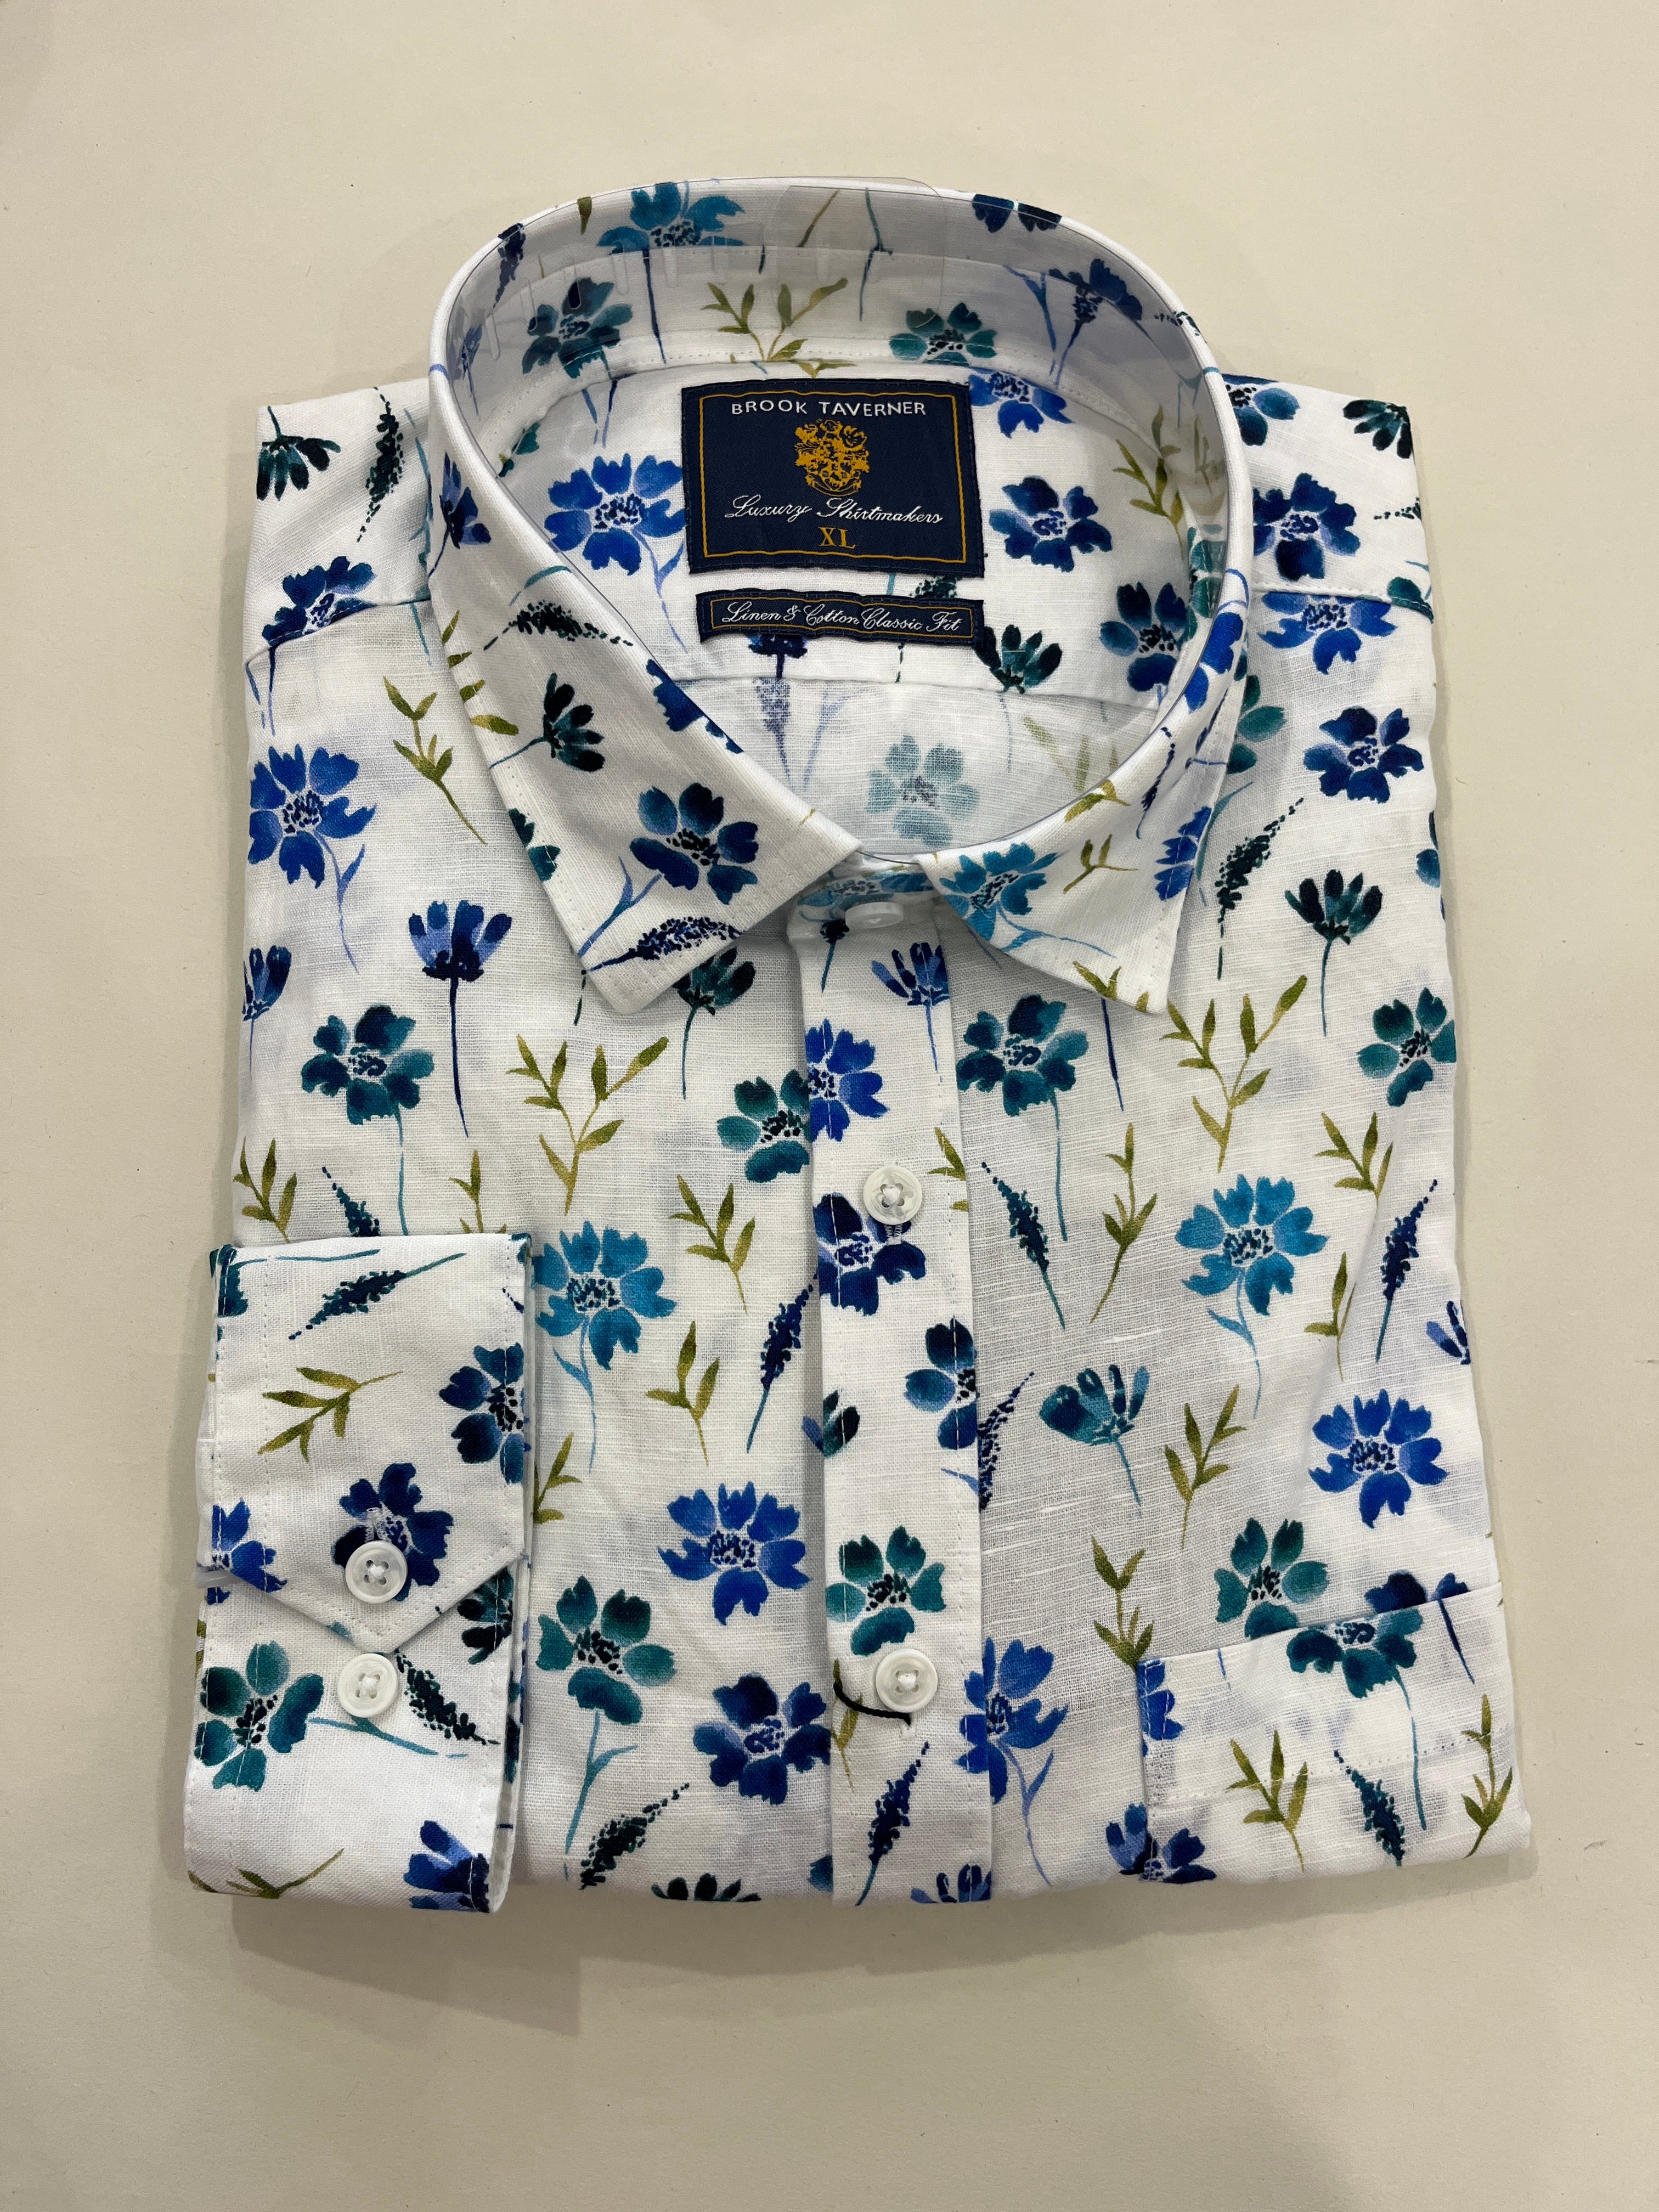 BROOK TAVERNER WHITE SHIRT WITH ALL THE BLUES FLOWER PRINT